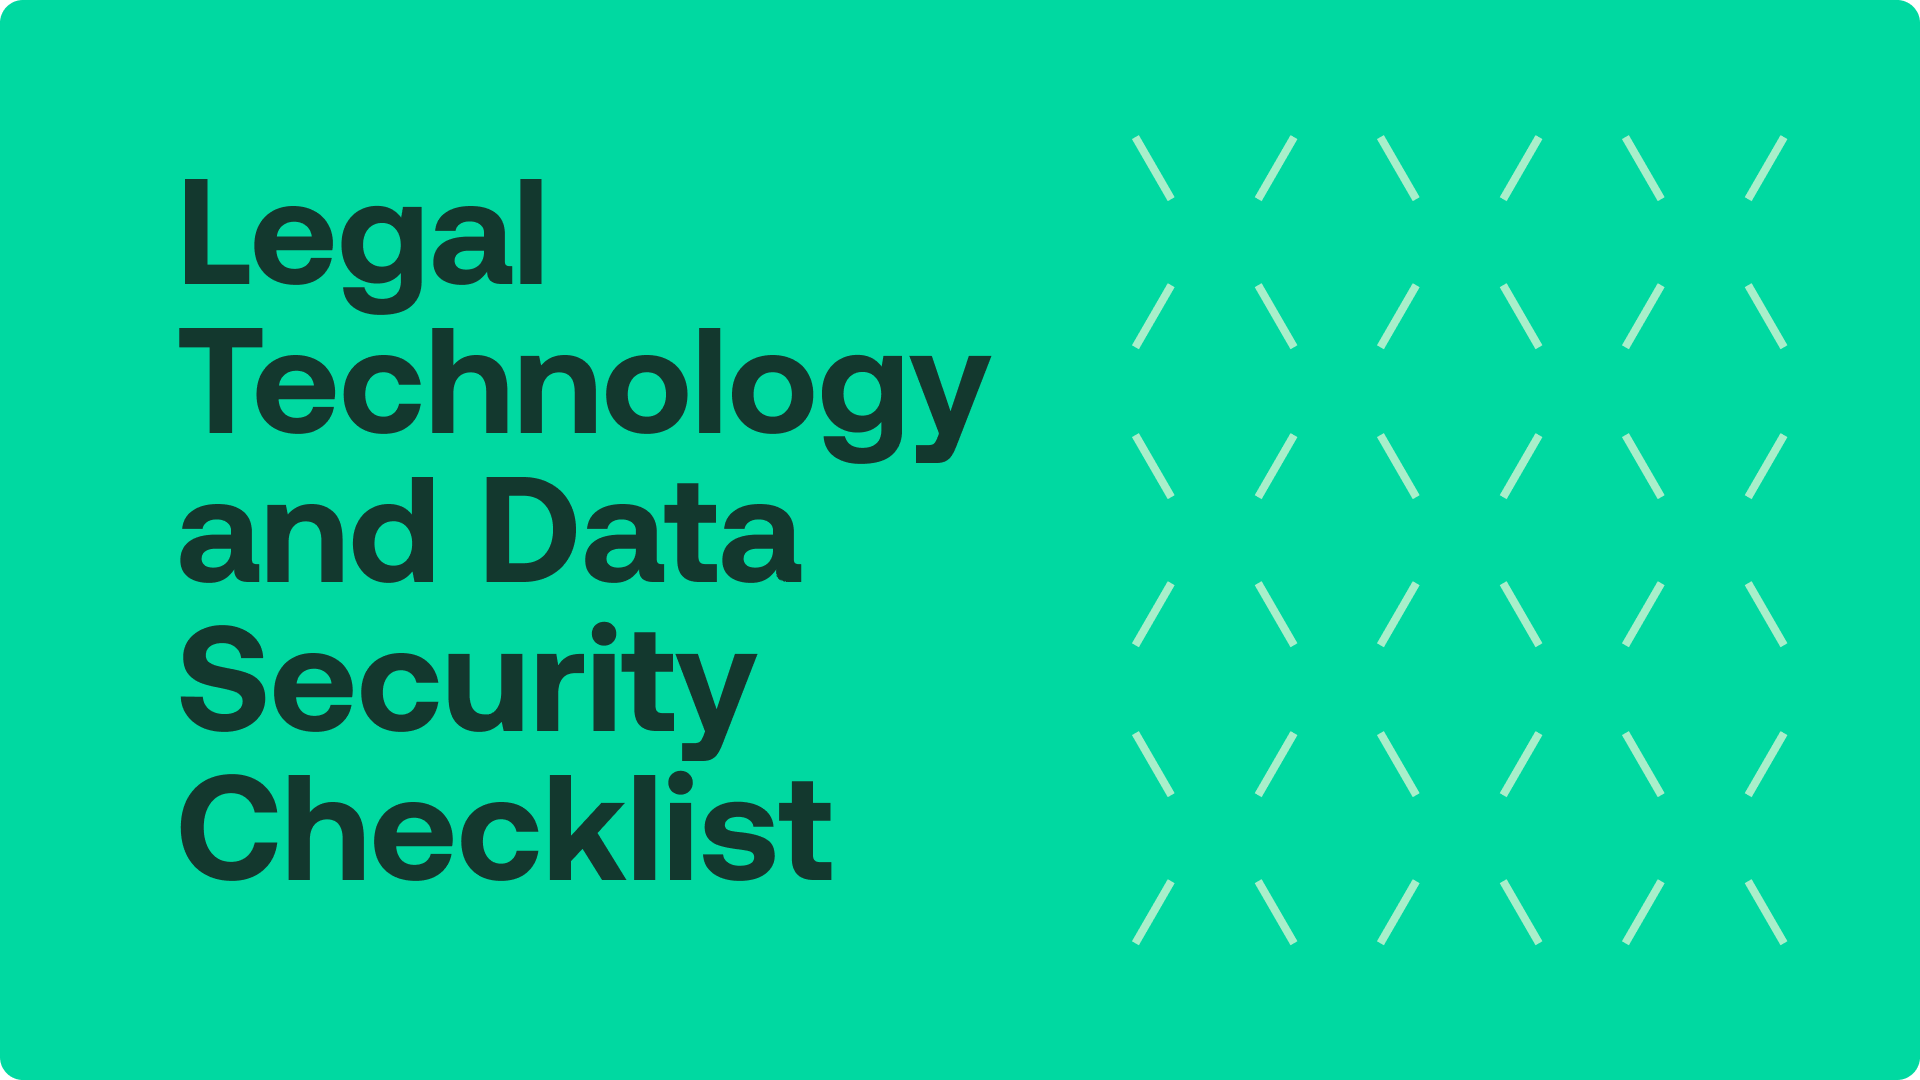 Legal technology and data security checklist